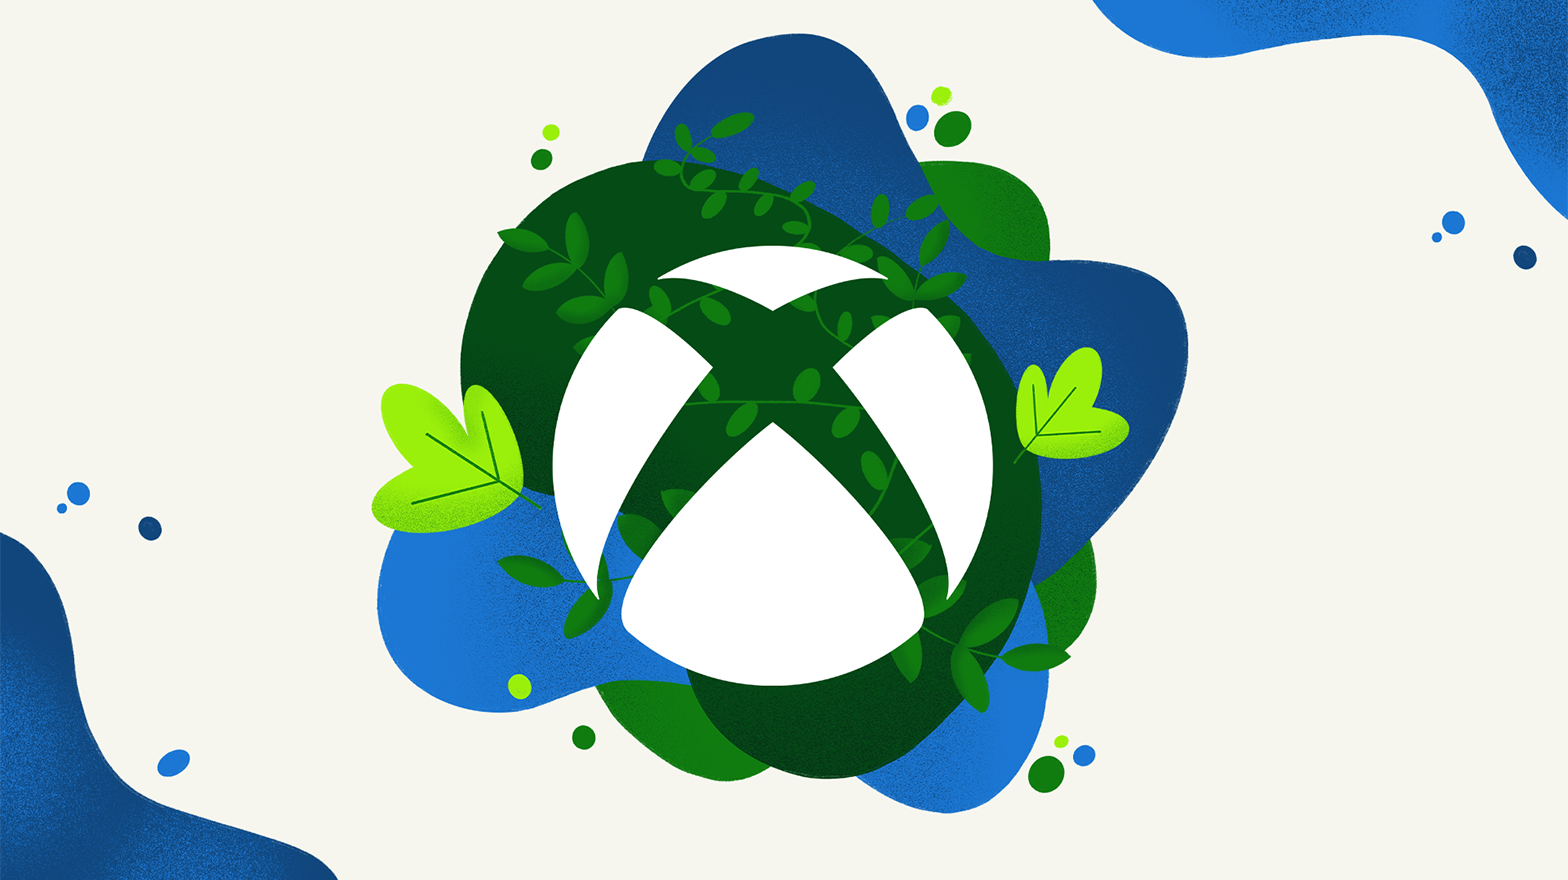 An image of the Xbox logo from Earth Day